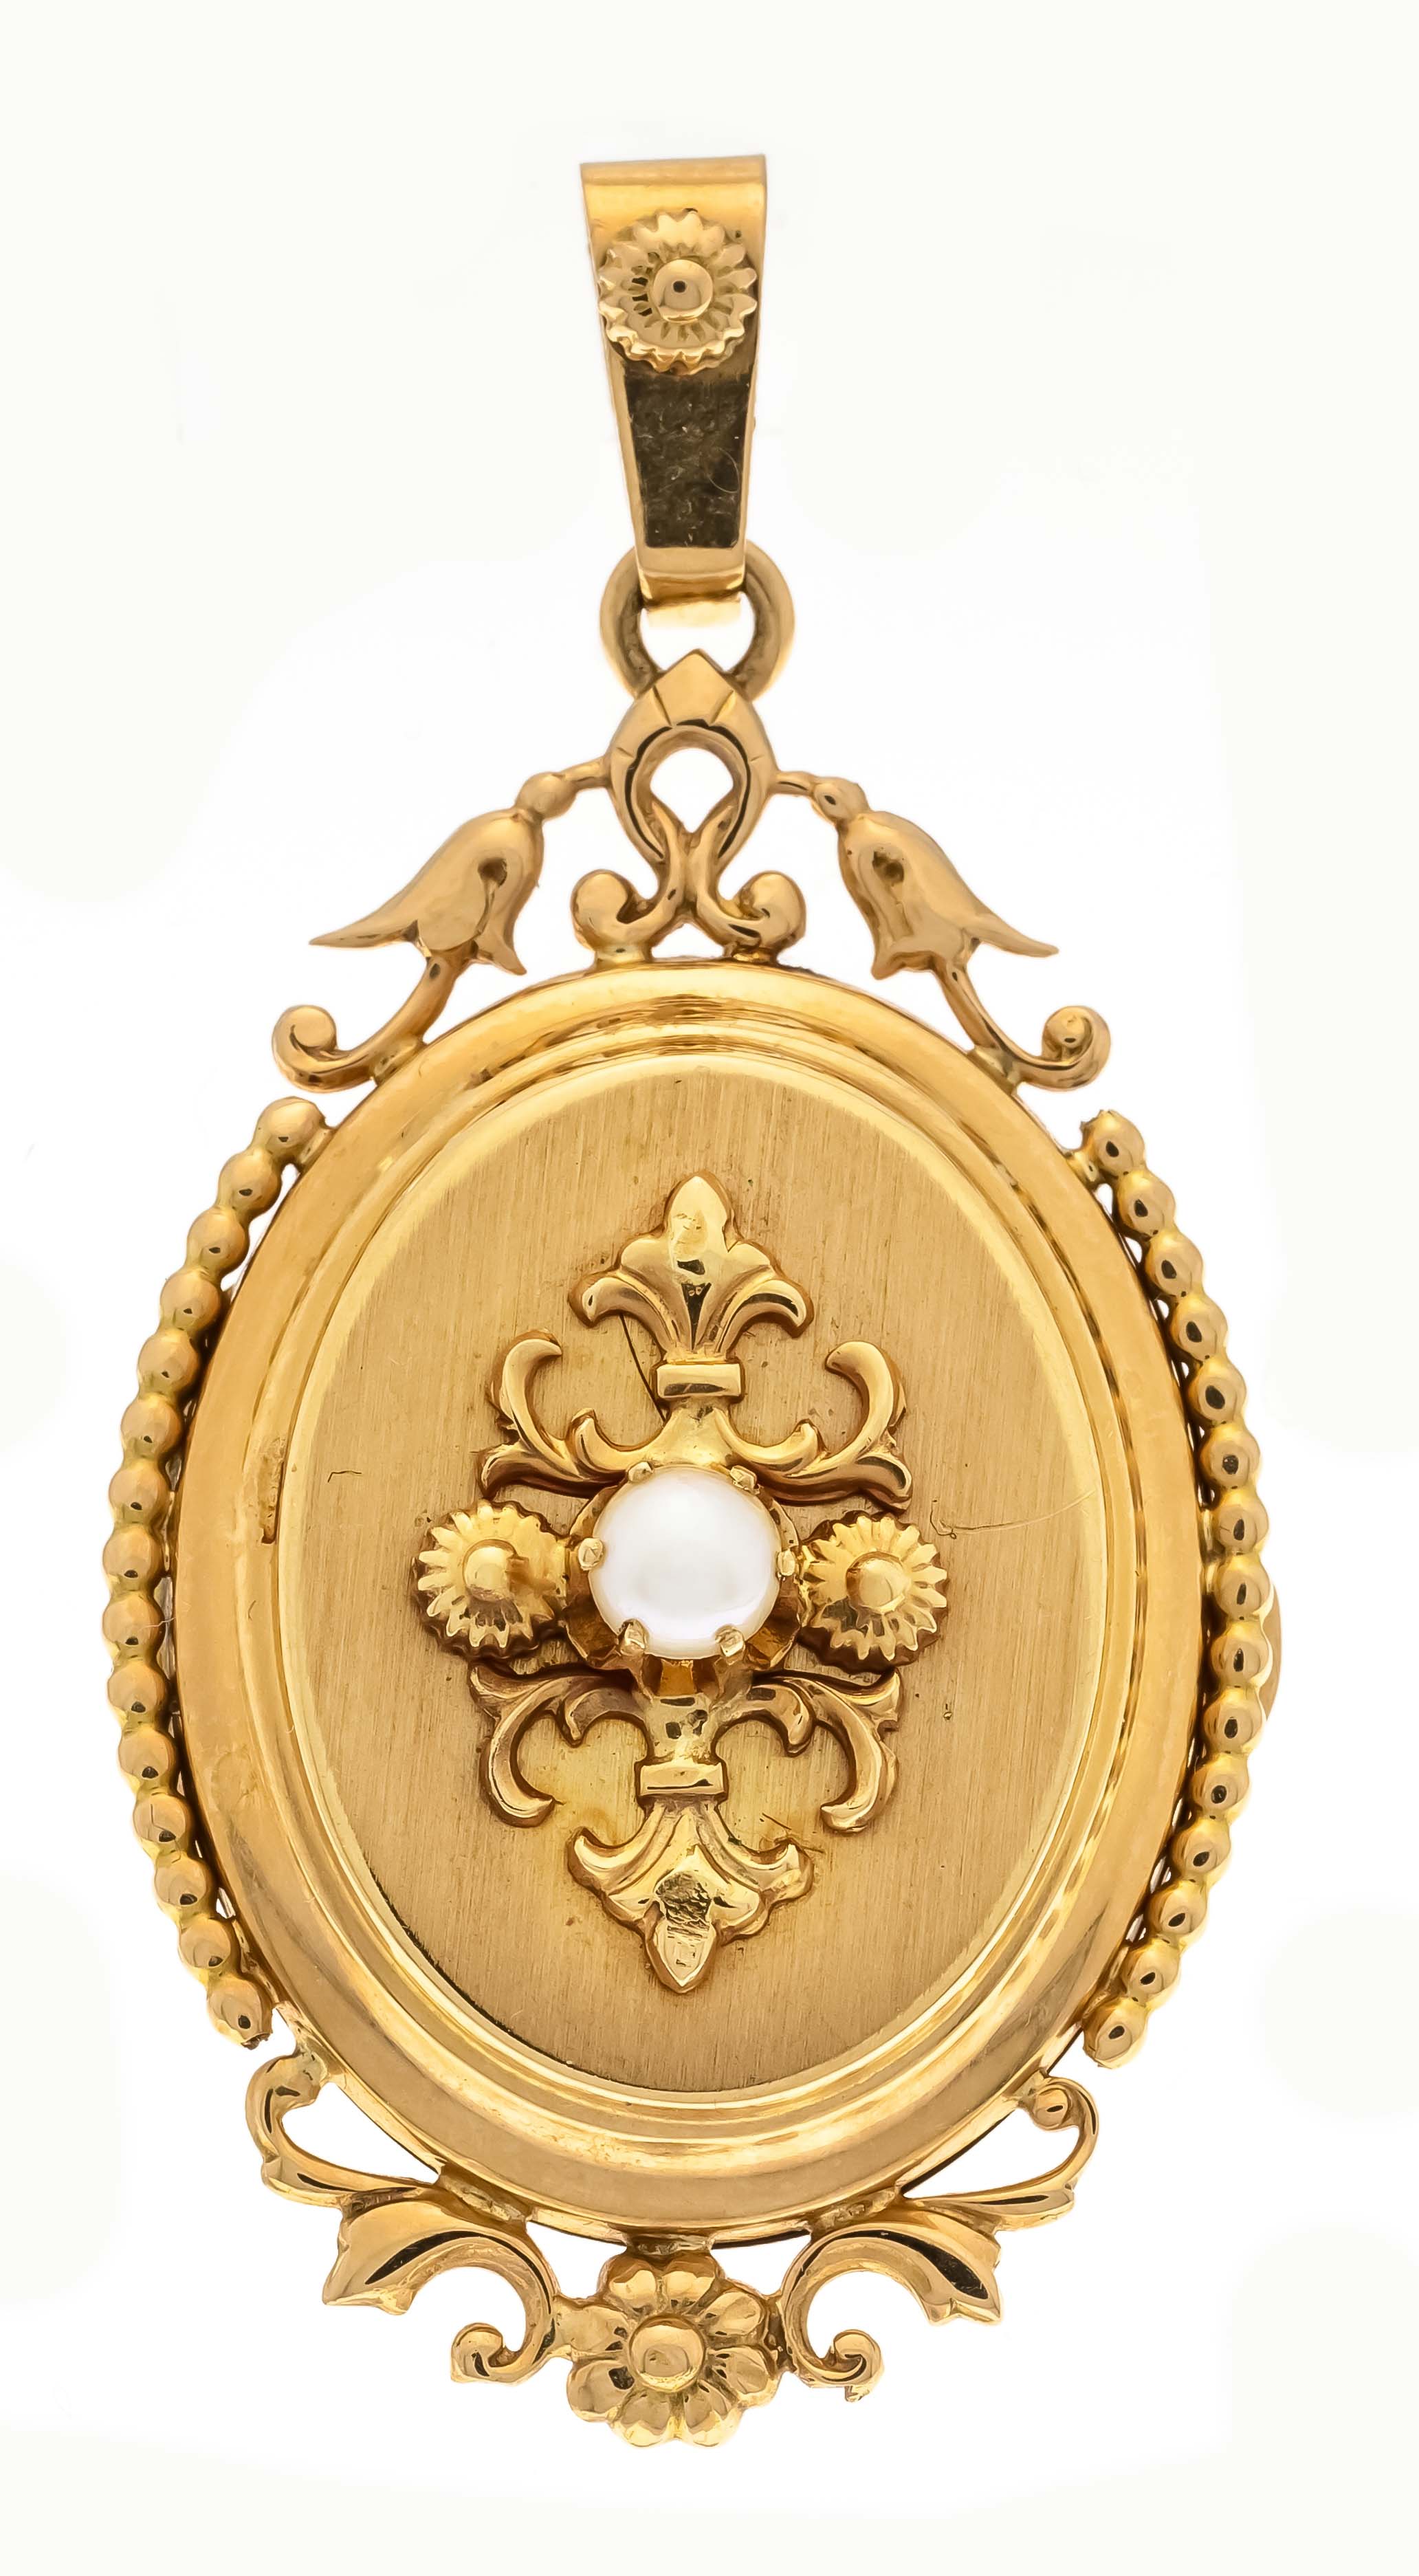 Historism medallion pendant GG 750/000 to open, with ornamental gold mounting, set with a white half